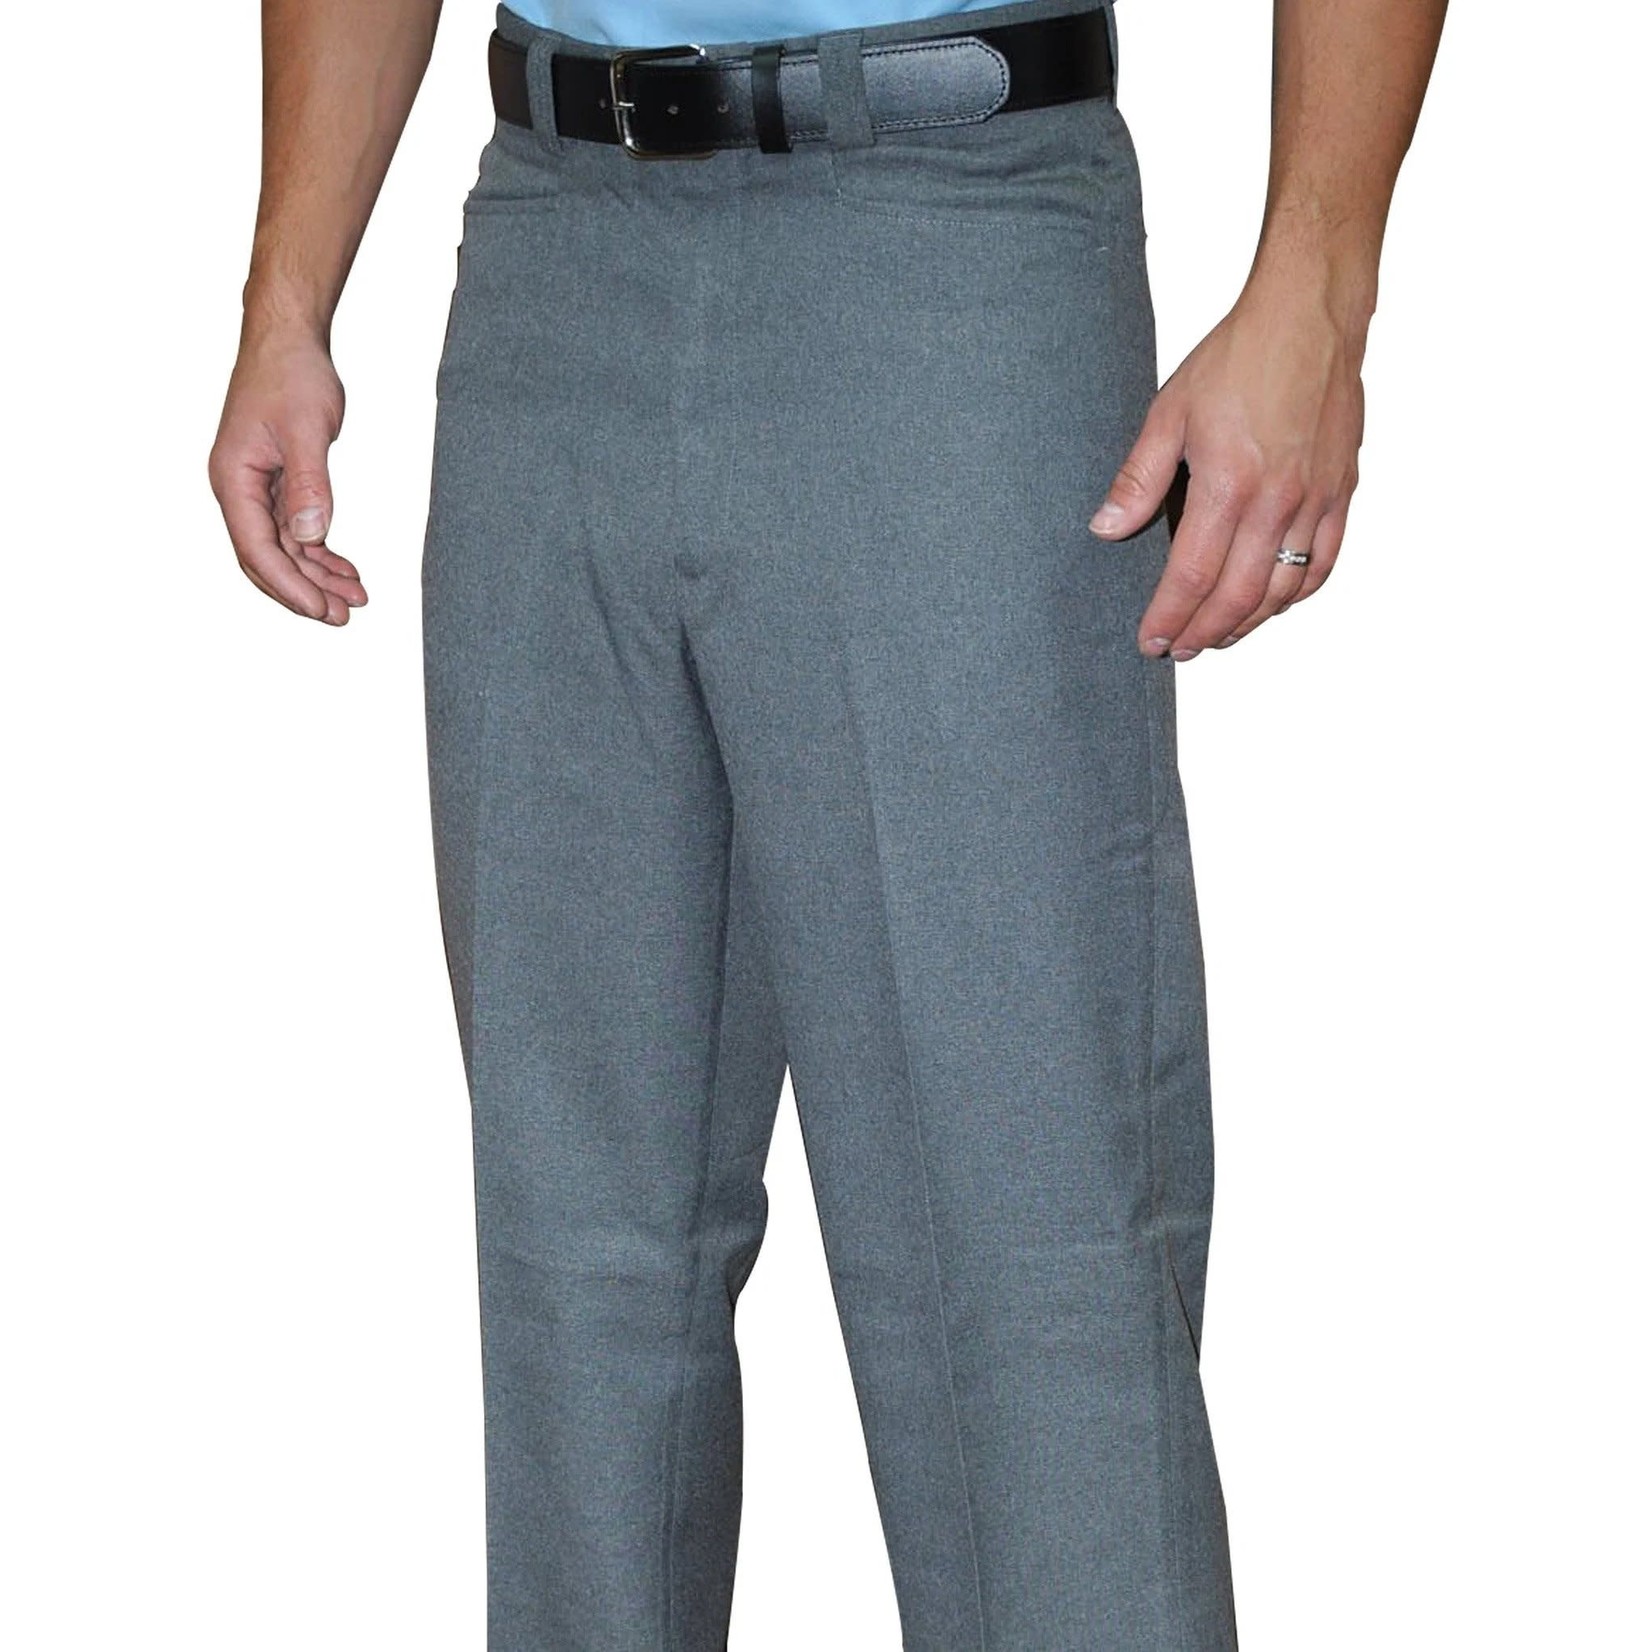 Smitty Heather Grey Flat Front Combo Pant